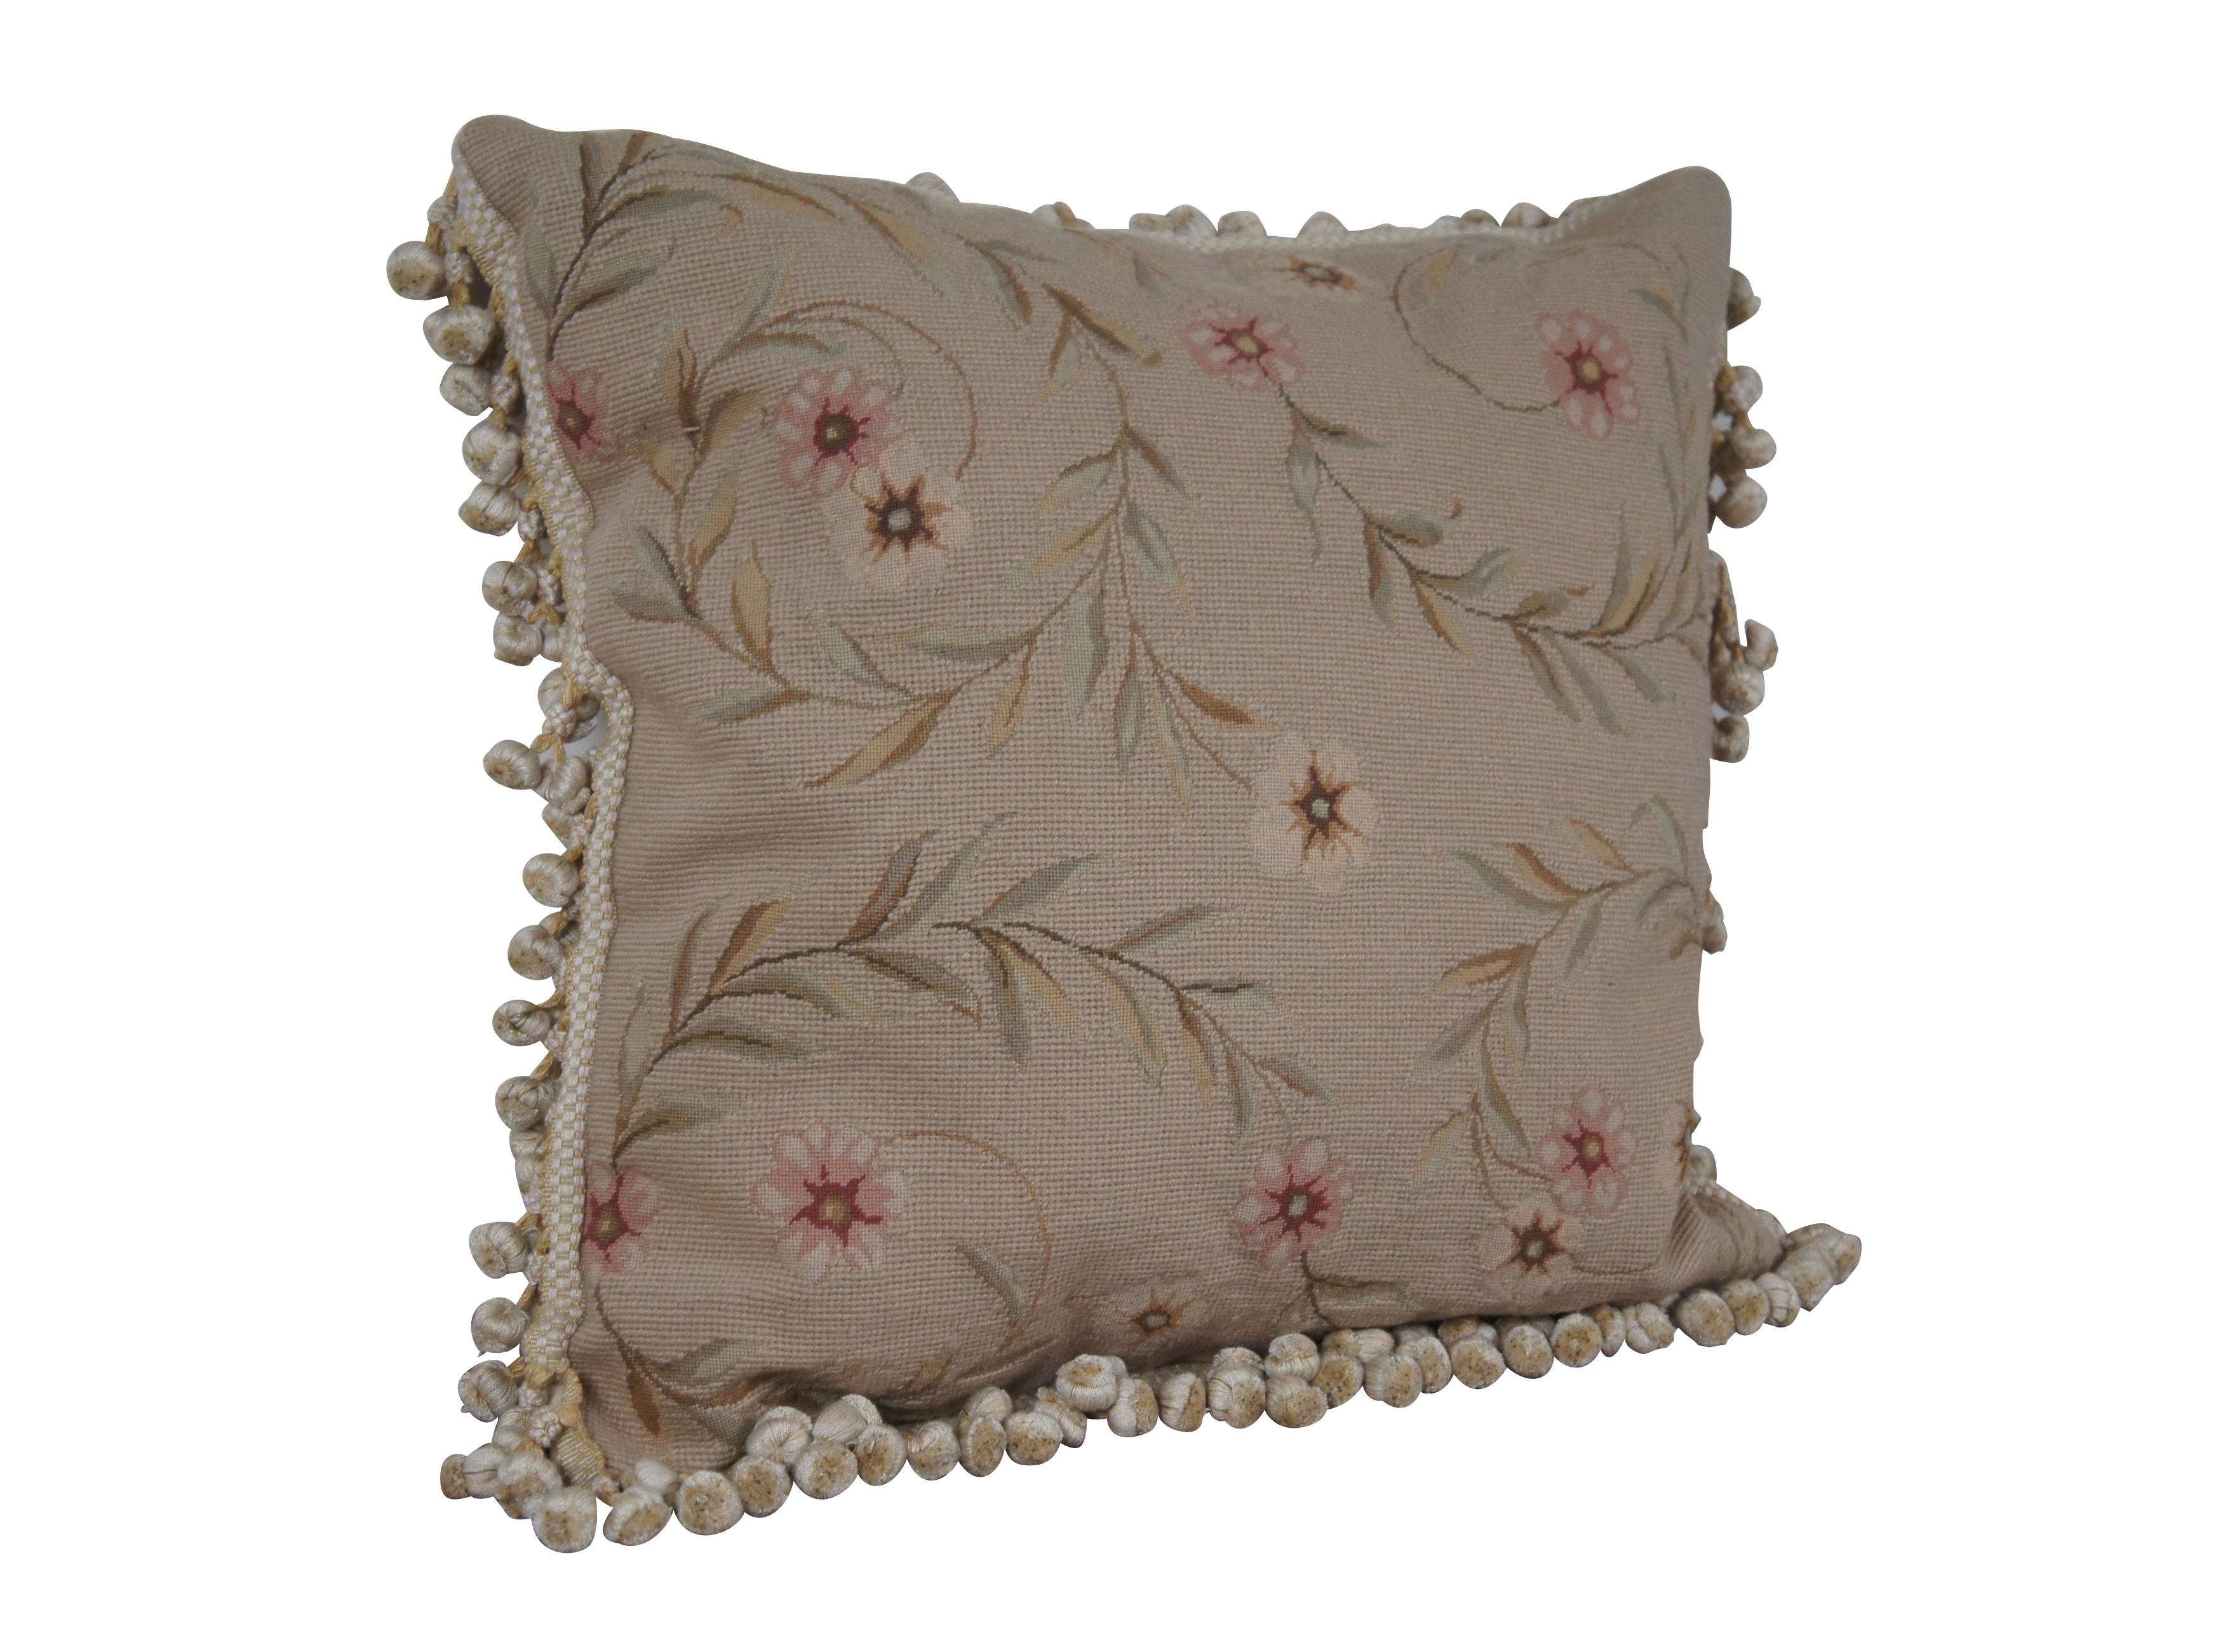 20th century square throw pillow, hand embroidered with pink and cream flowers on spiraling leafy stems, over a beige background. Cream and gold ball tassel trim. Cream velour back with zipper closure. Down filled.

Dimensions:
22